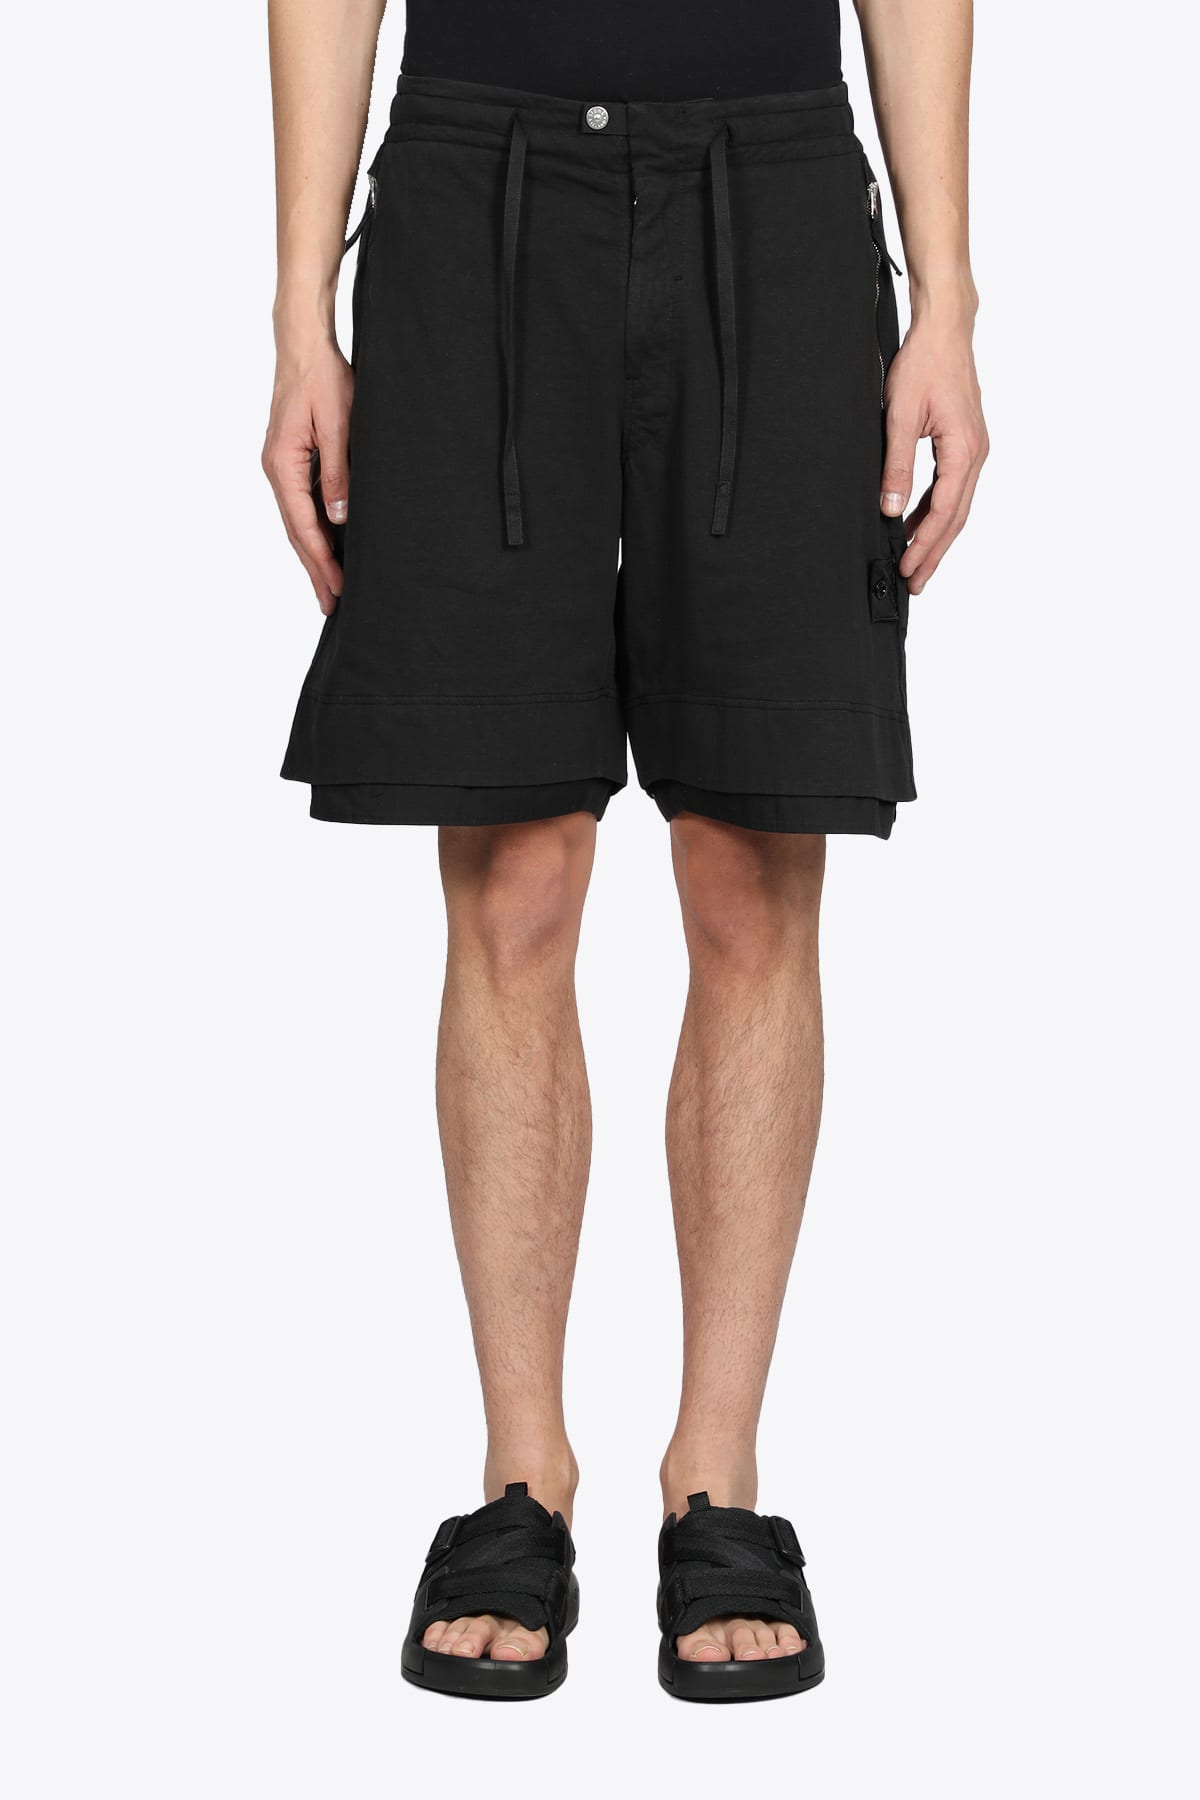 Stone Island Shadow Project Summer Shorts Chapter 2 Black cotton bermuda with drawstring